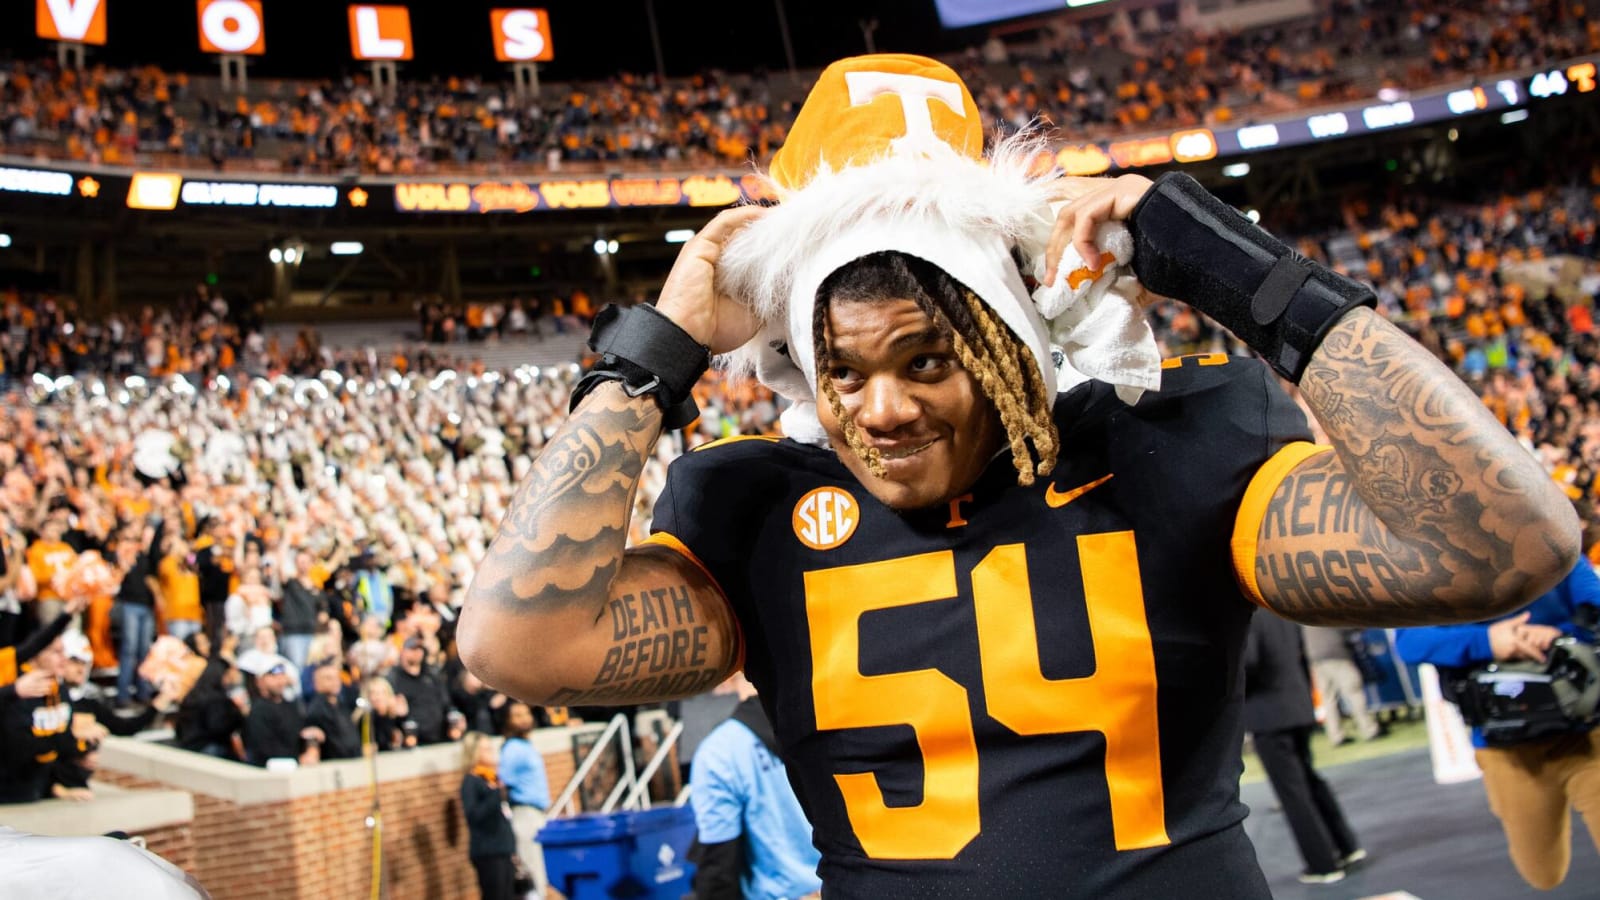 Will Tennessee be at No. 1 in the first College Football Playoff ranking?